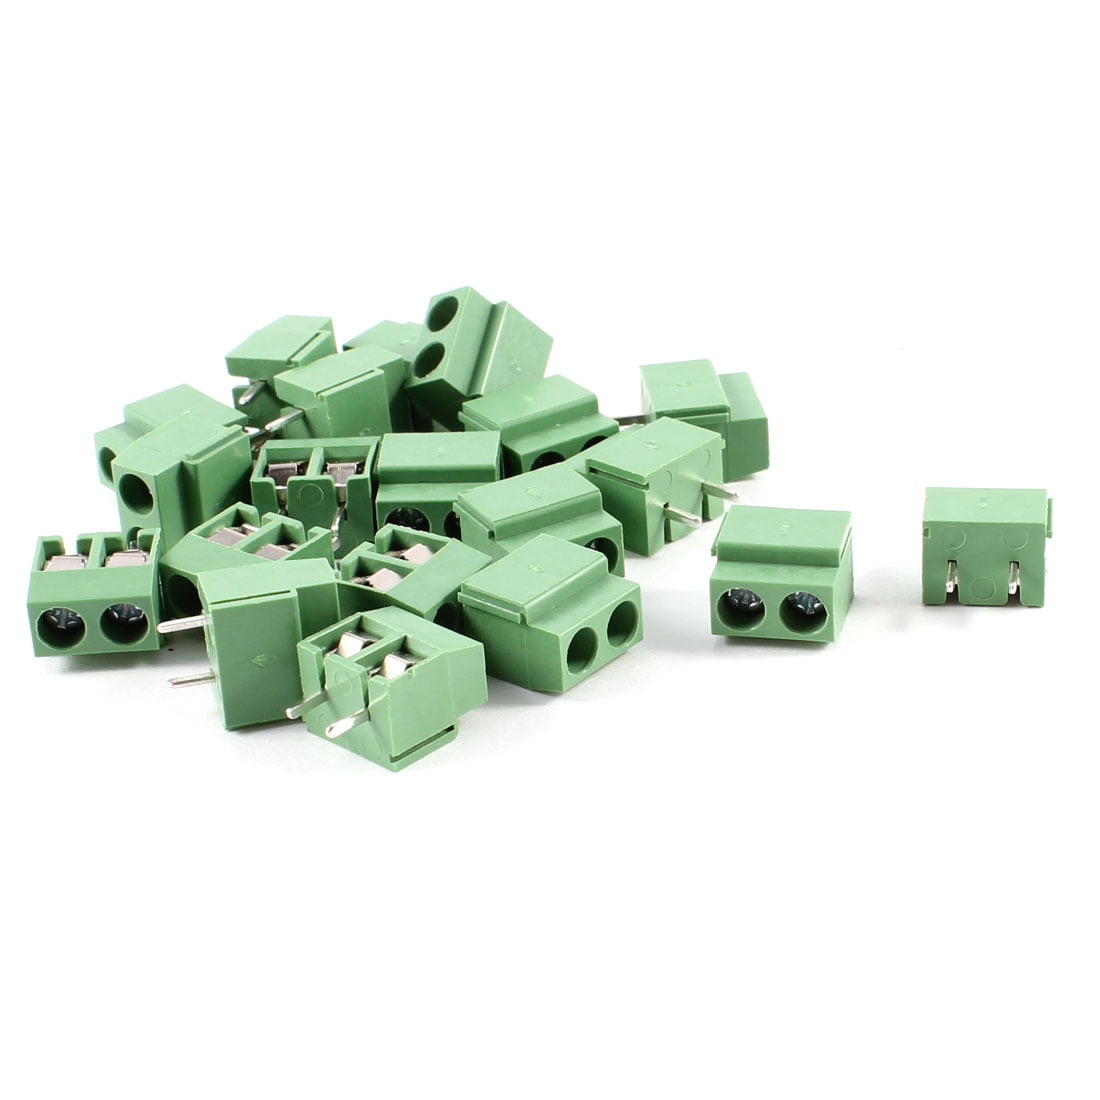 30Pcs 2 Pole 5mm Pitch PCB Mount Screw Terminal Block Connector 10A 300V Latest